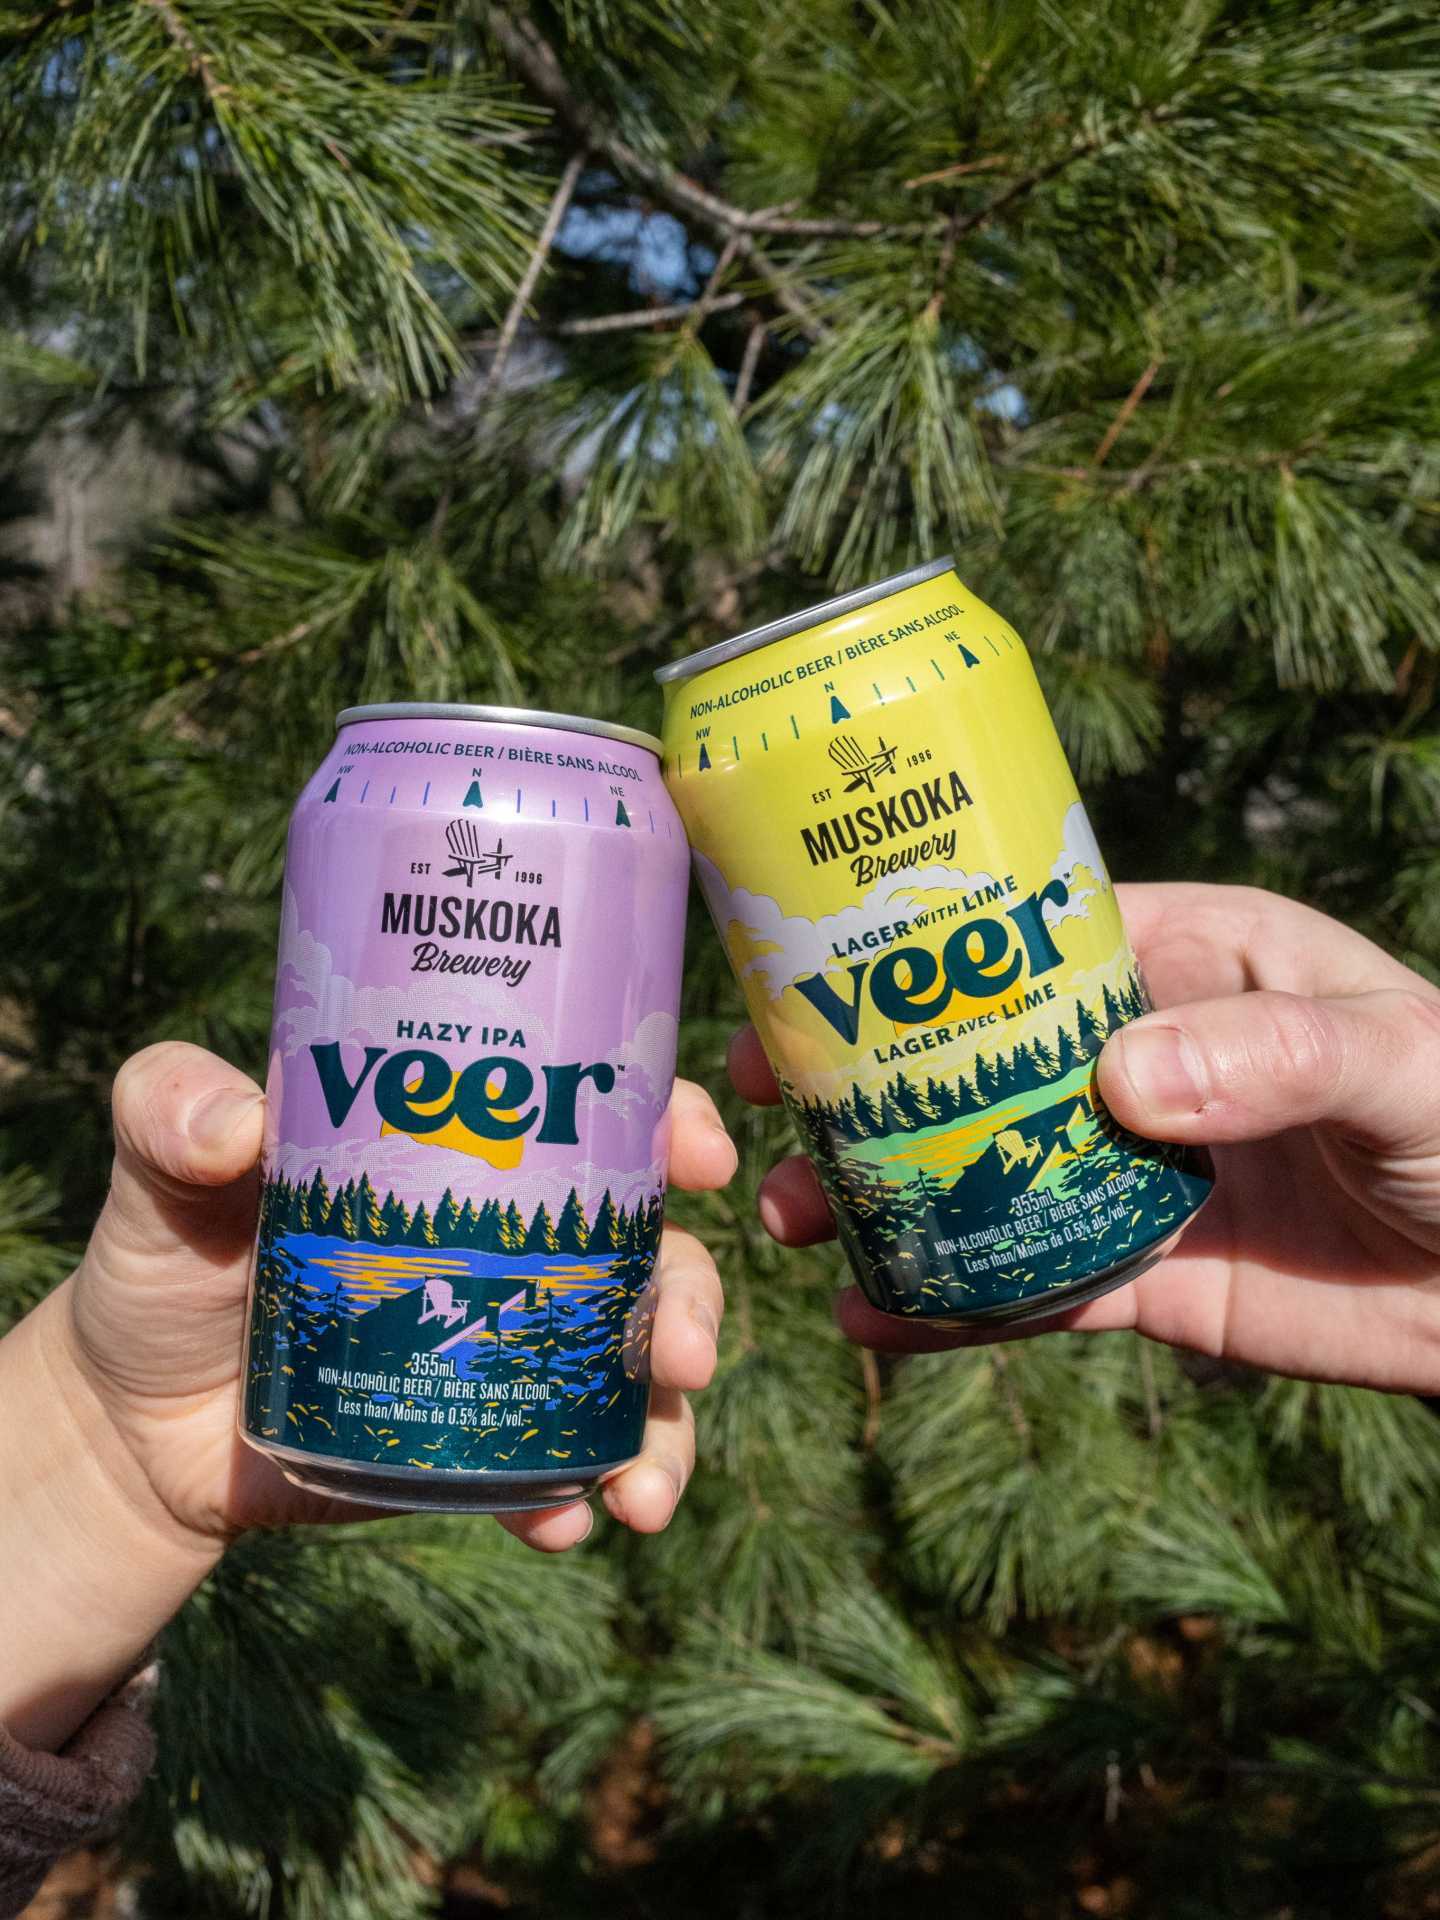 Two cans of Muskoka Brewery Veer